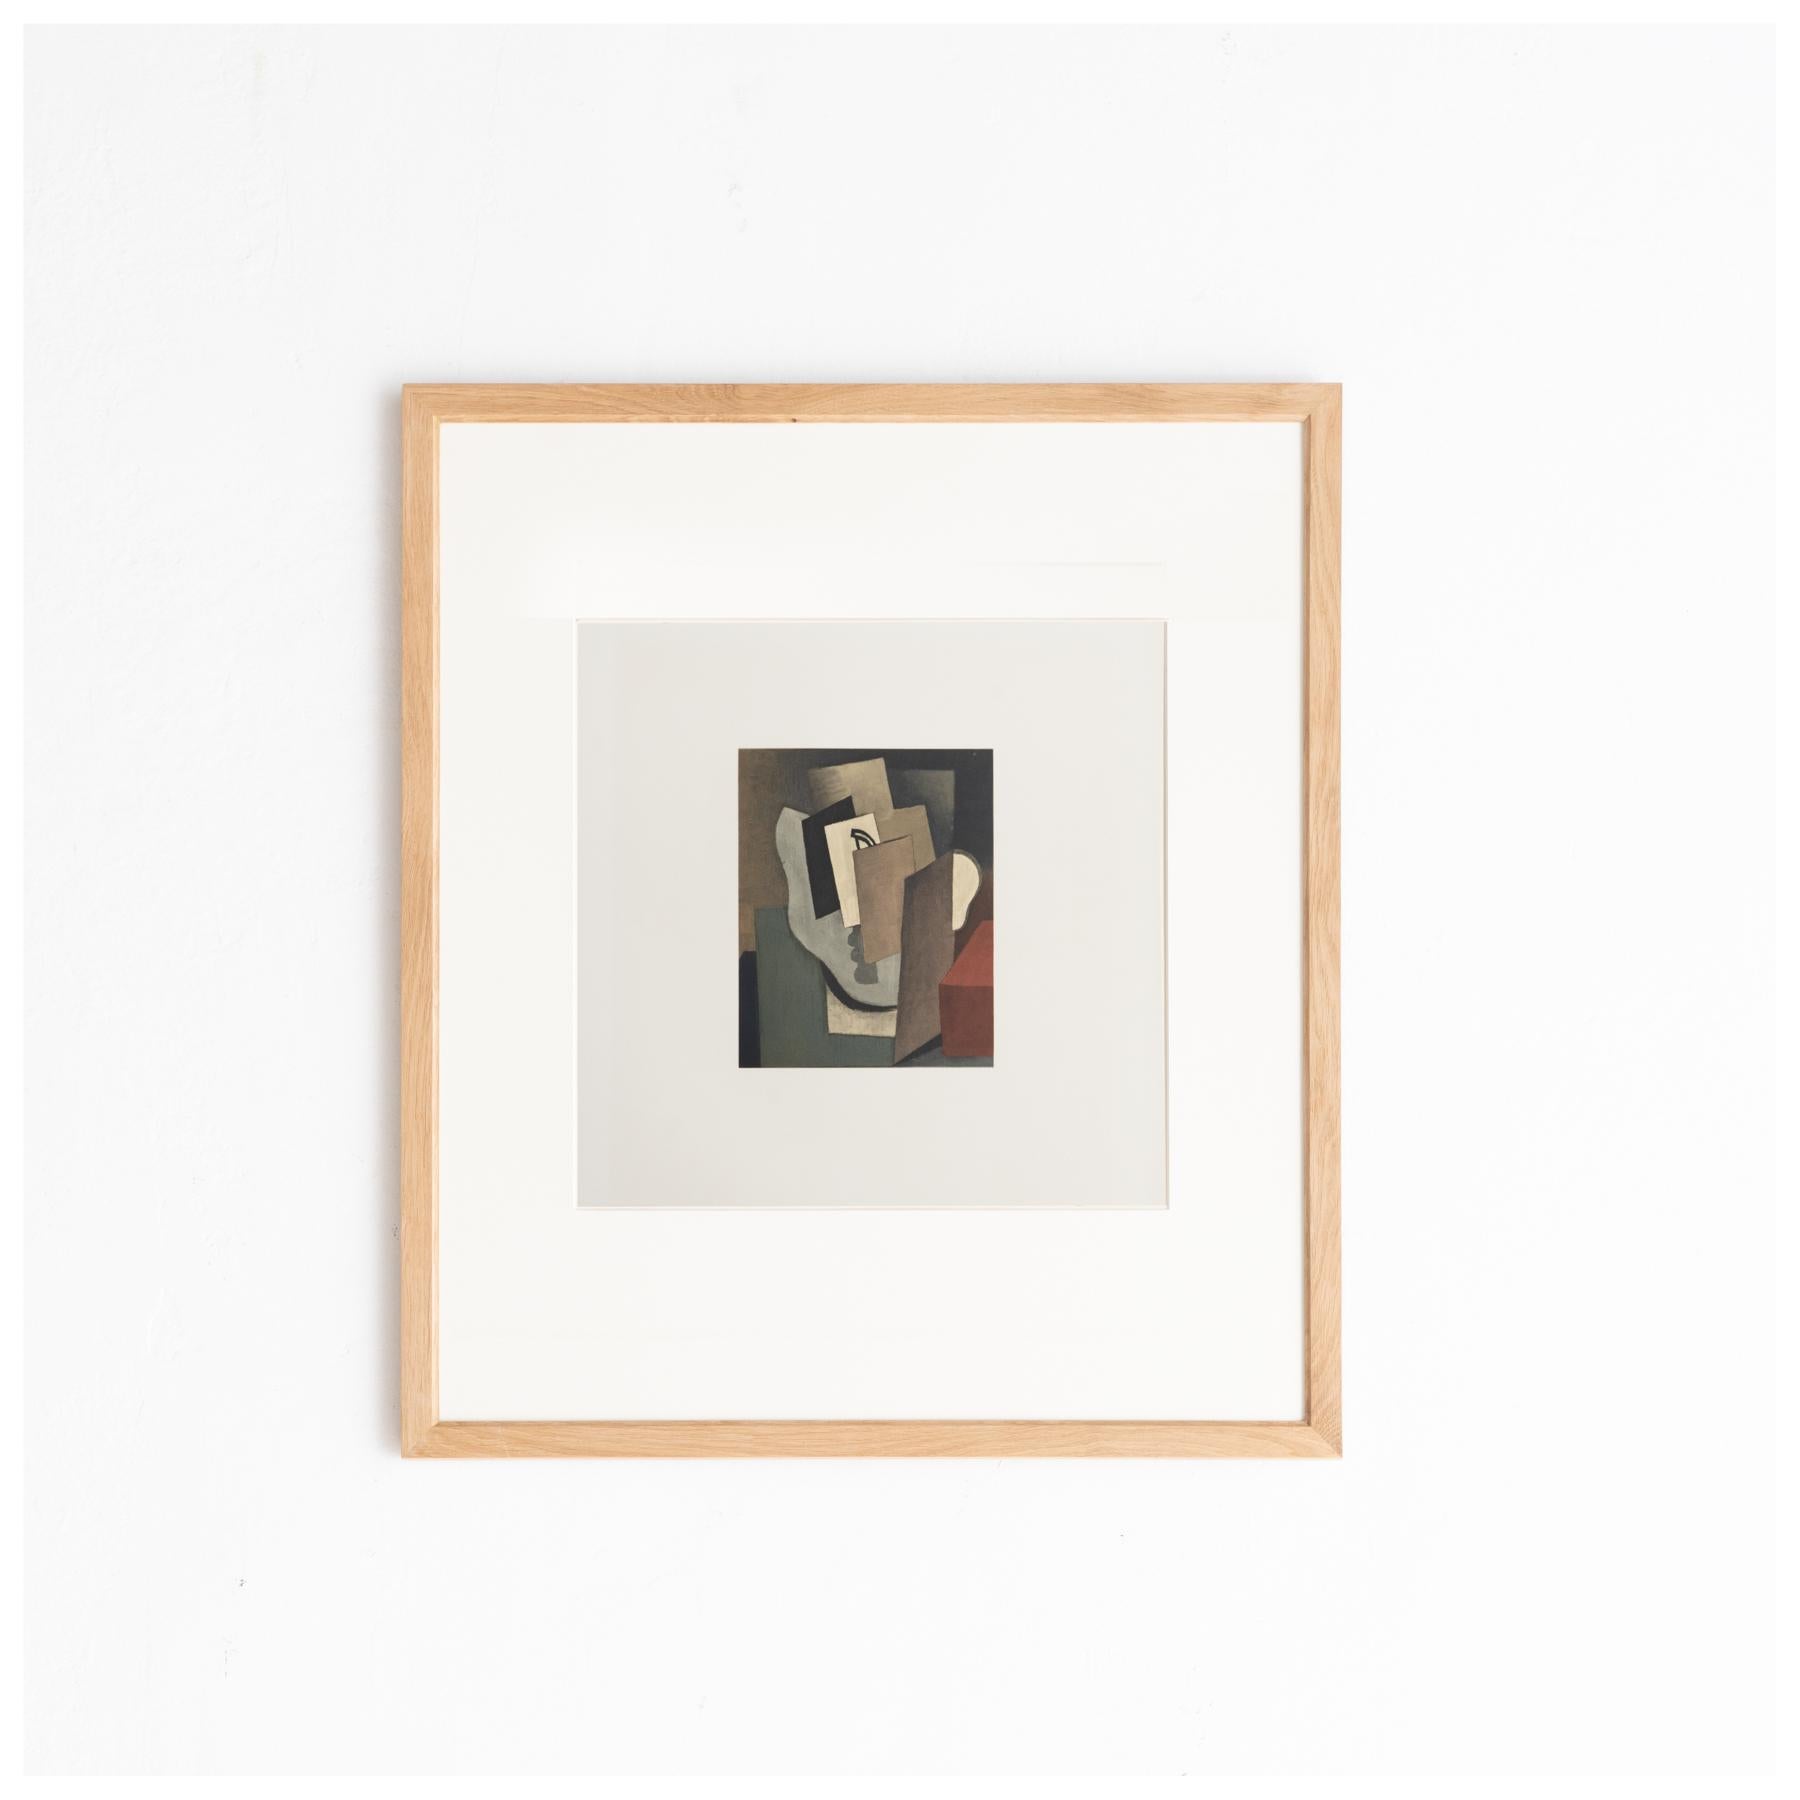 Original color lithograph 'Visage' by Roger de la Fresnaye.

Lithograph printed from an original painting made by the author in France, circa 1921.

Published in France by Fernand Mourlot, circa 1968. 

In good original condition, with minor